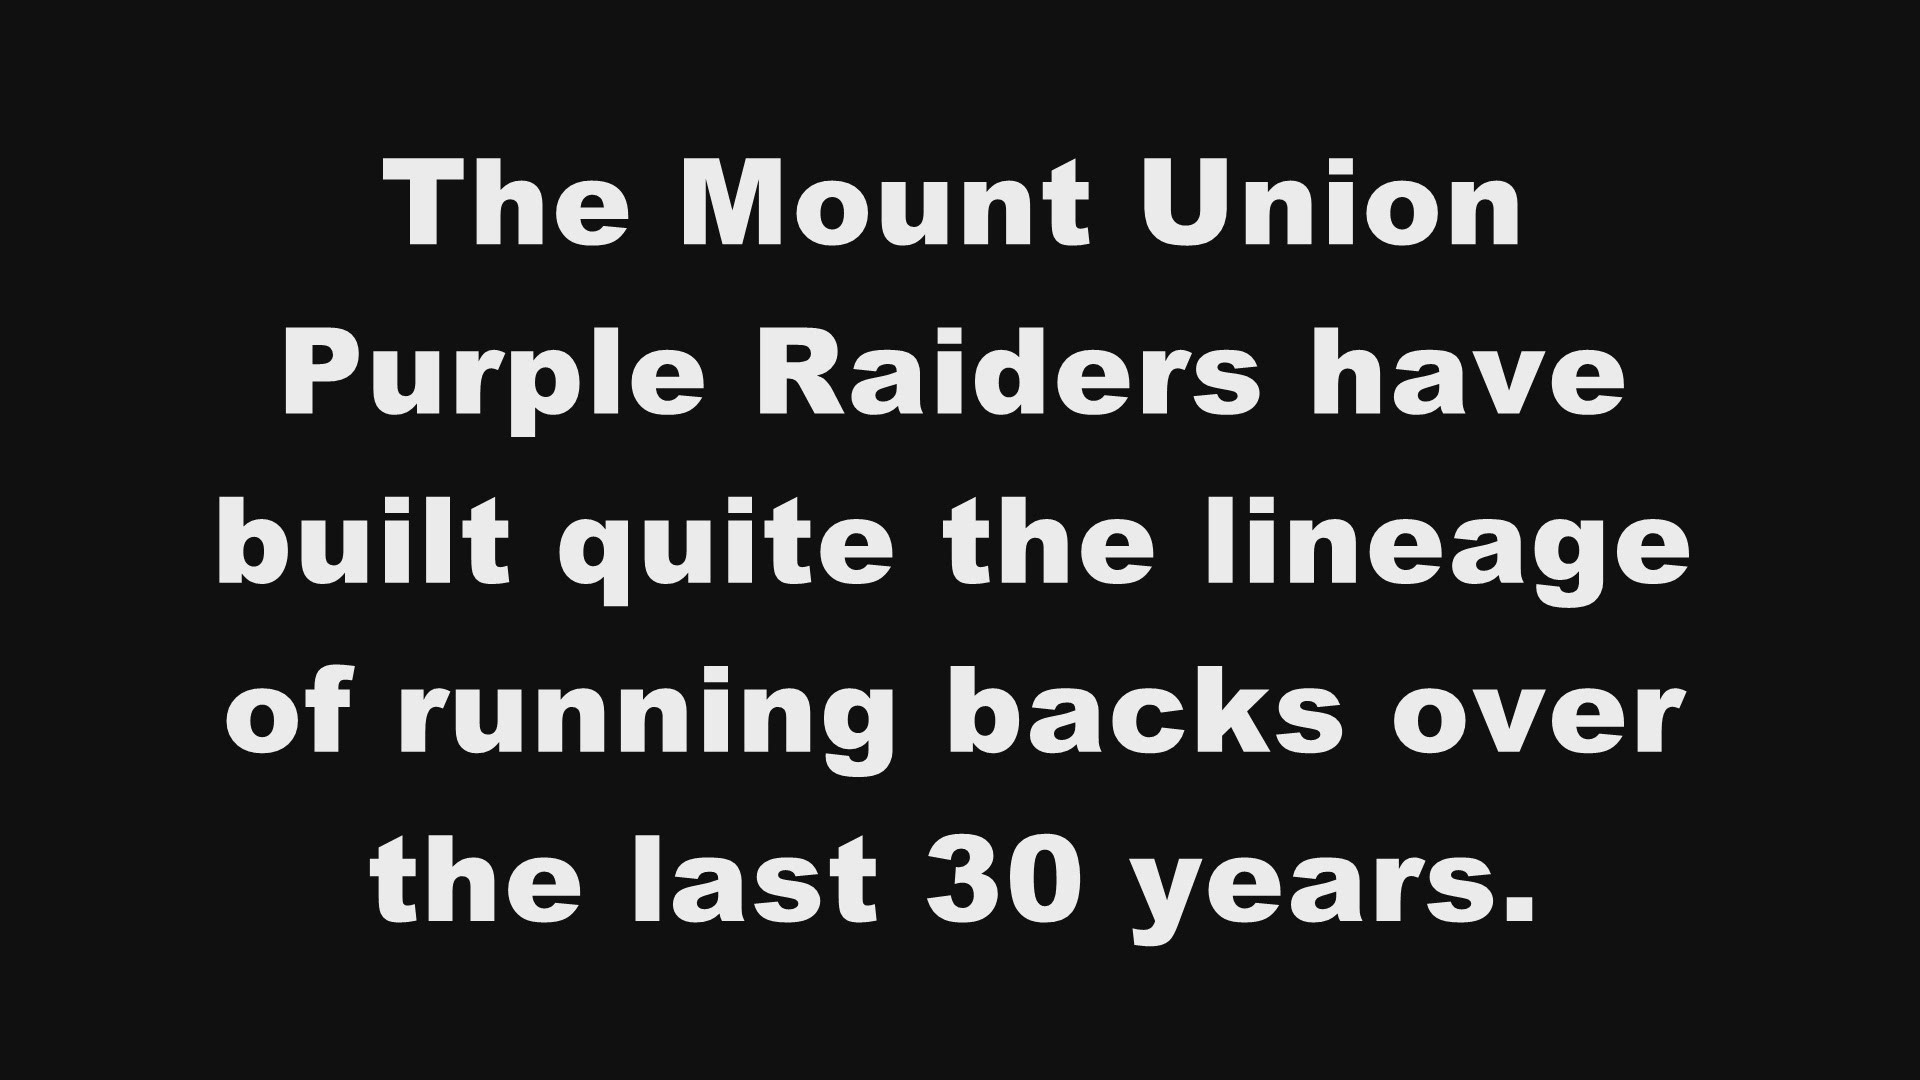 Josh Petruccelli went to Mount Union to be a part of something special. Now, the junior rusher is being mentioned among the best running backs in school history